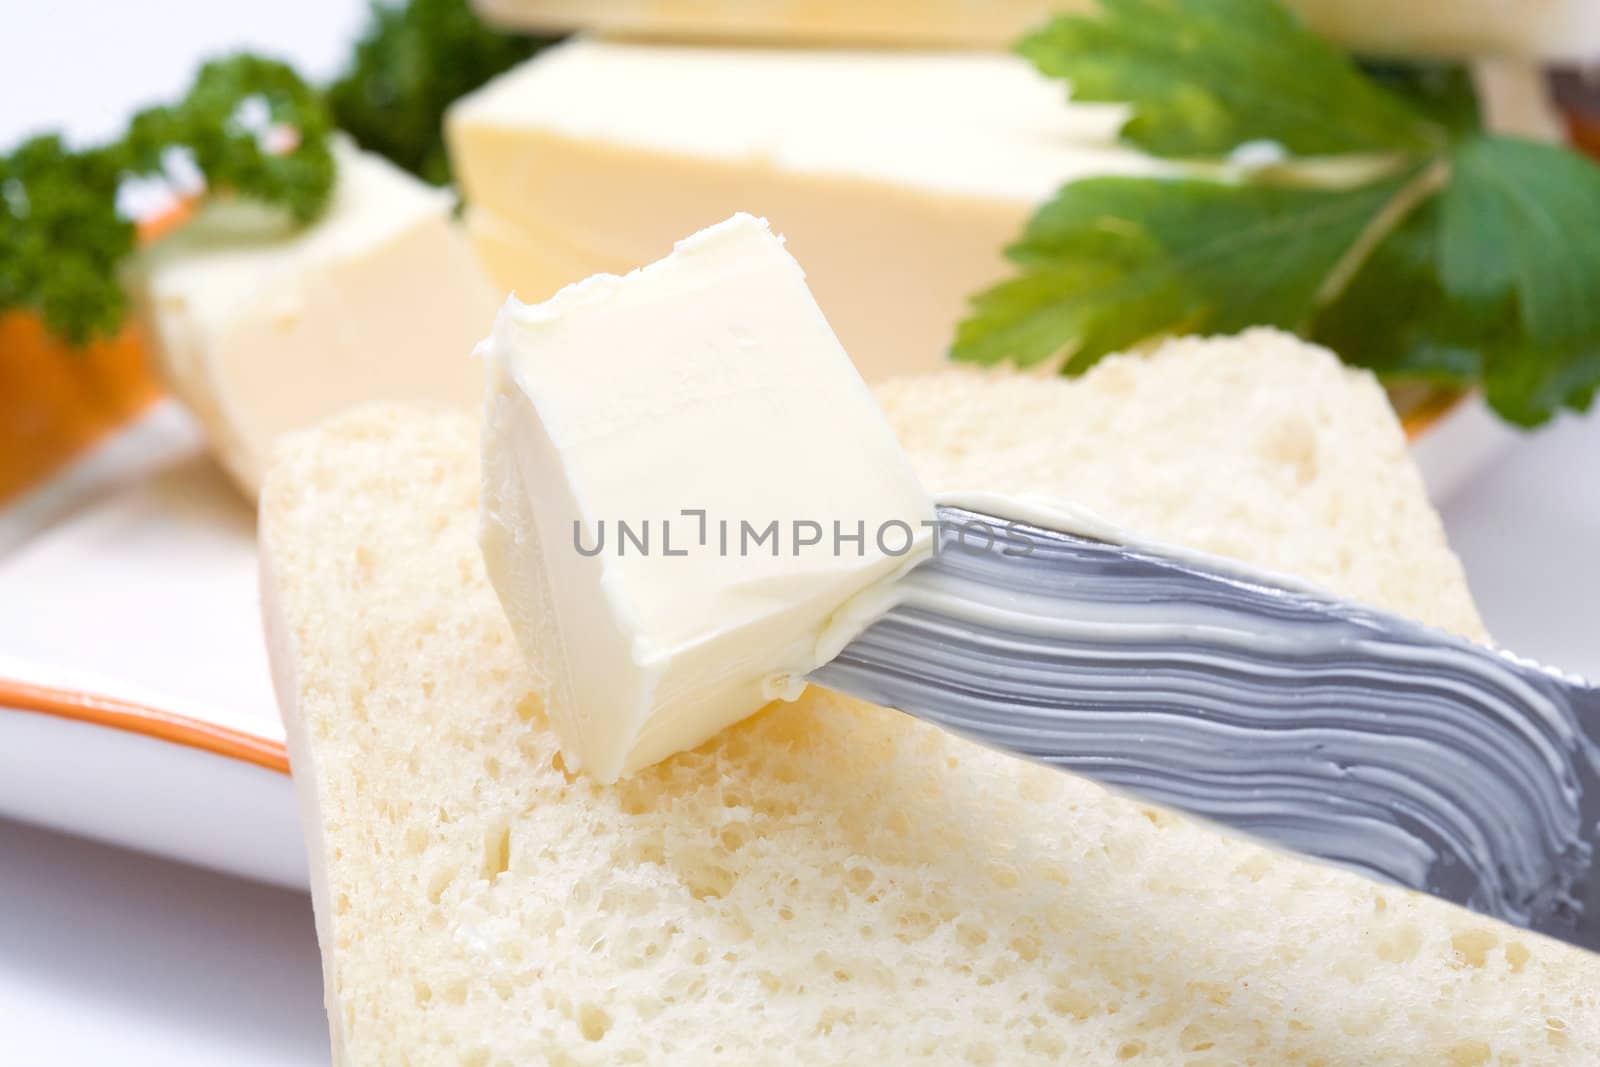 Stock photo: an image of fresh butter on a knife with bread and parsley